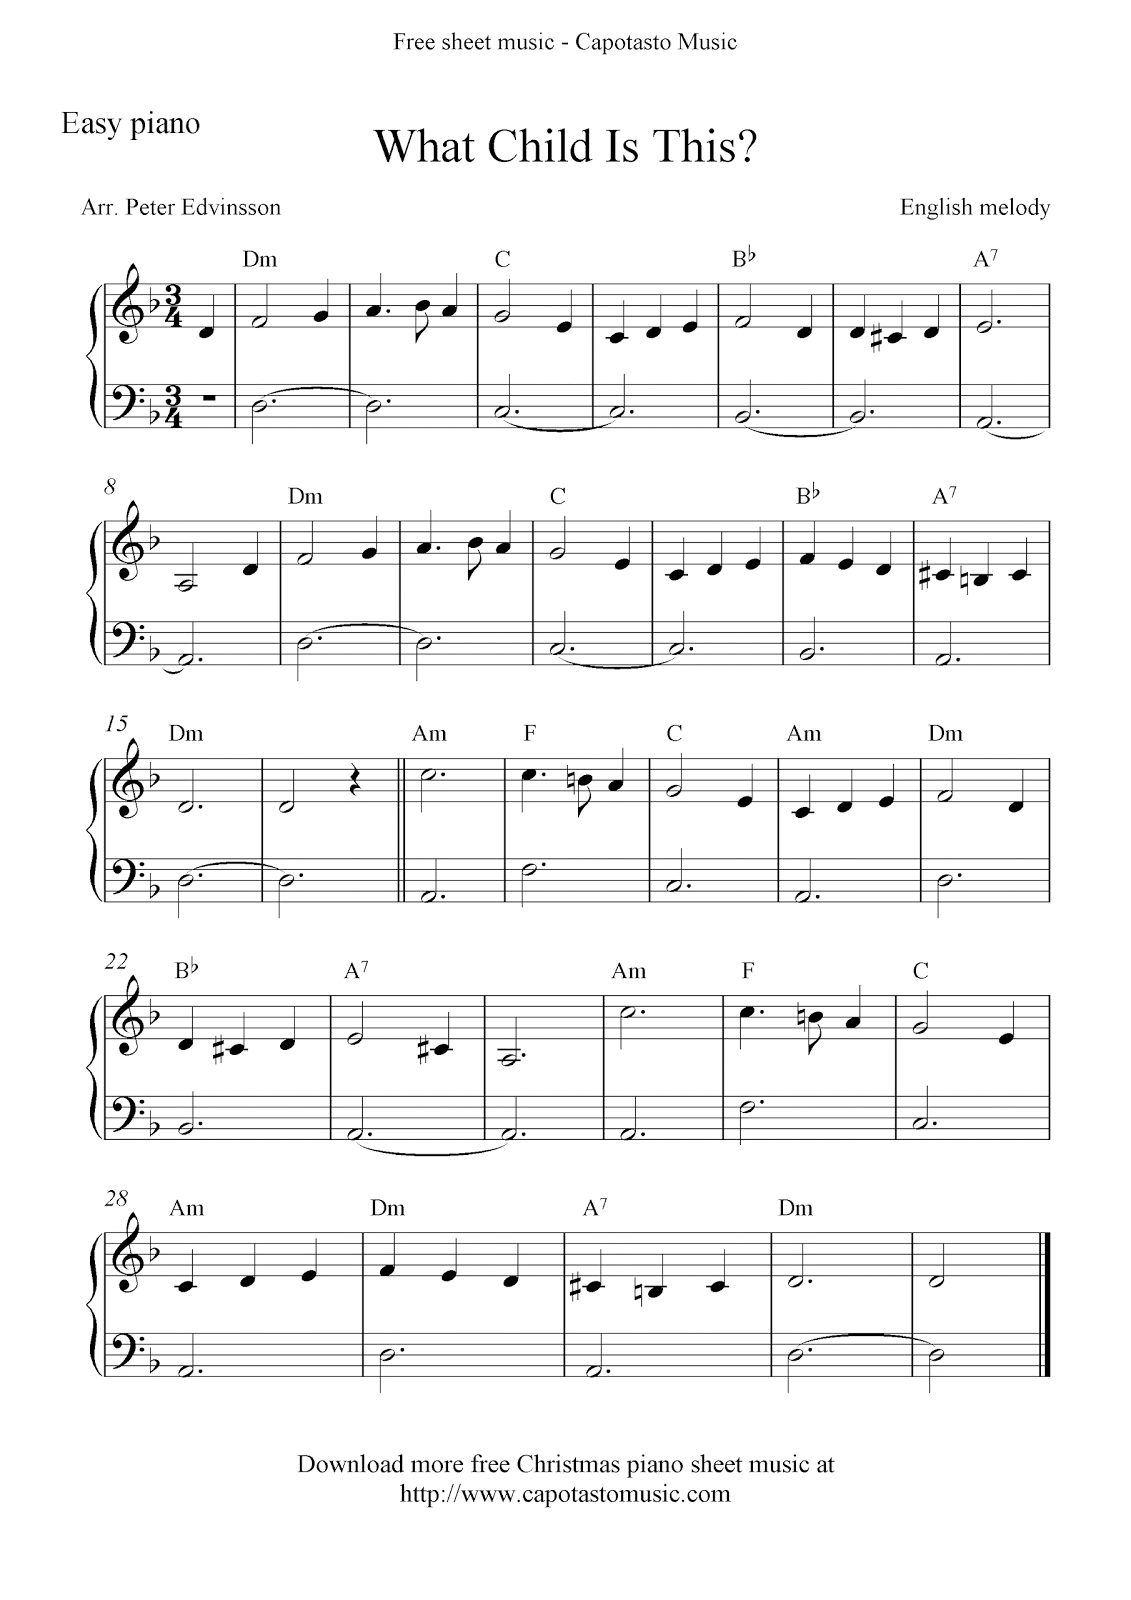 Easy Piano Solo Arrangementpeter Edvinsson Of The Christmas - Free Christmas Piano Sheet Music For Beginners Printable